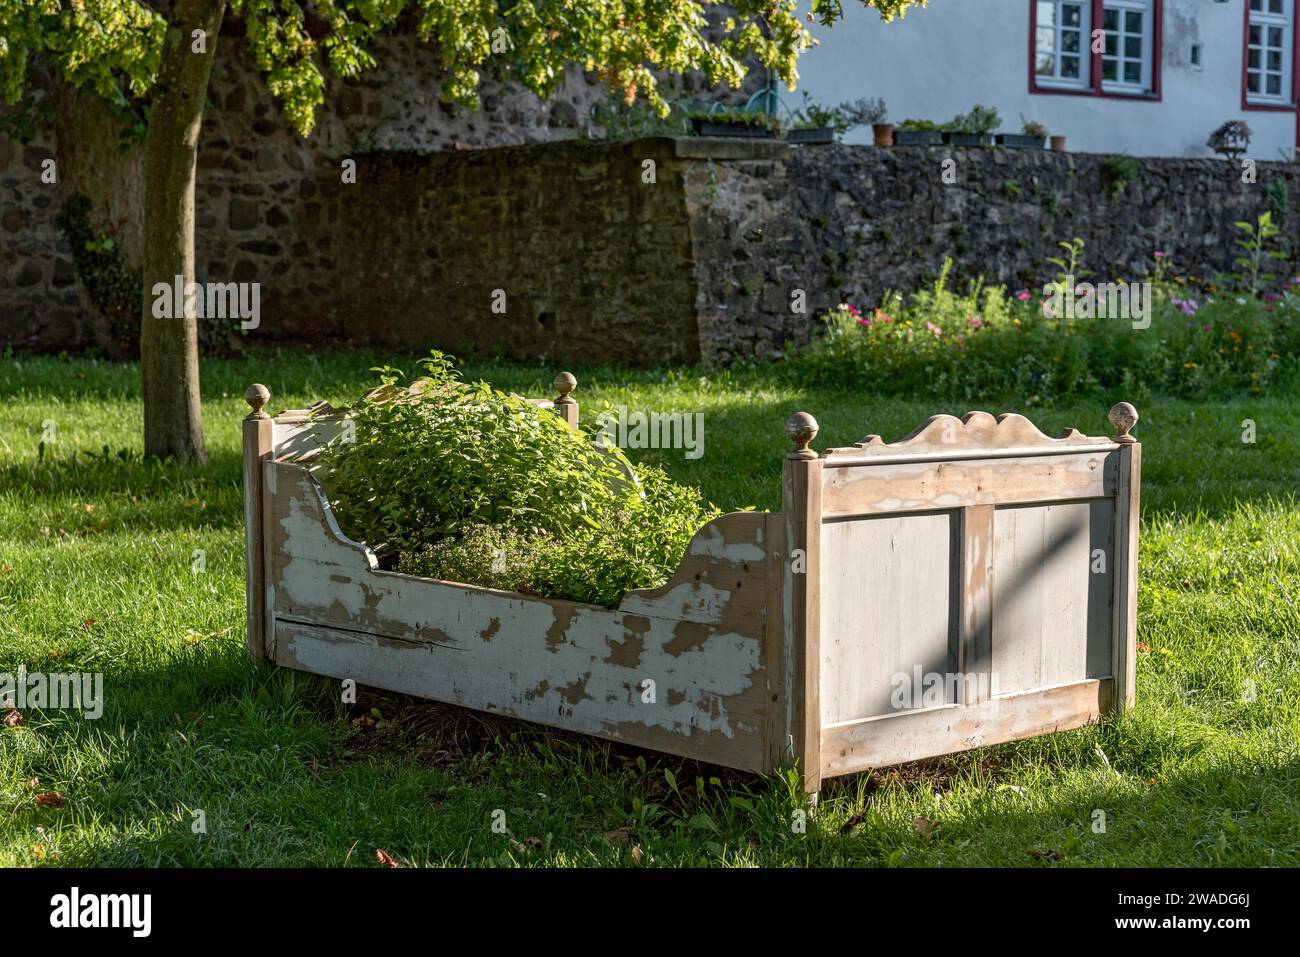 Old wooden bed as raised bed, herb garden, herbs and vegetables grown in it, garden of Friedberg Castle, castle park, old town, Friedberg Stock Photo